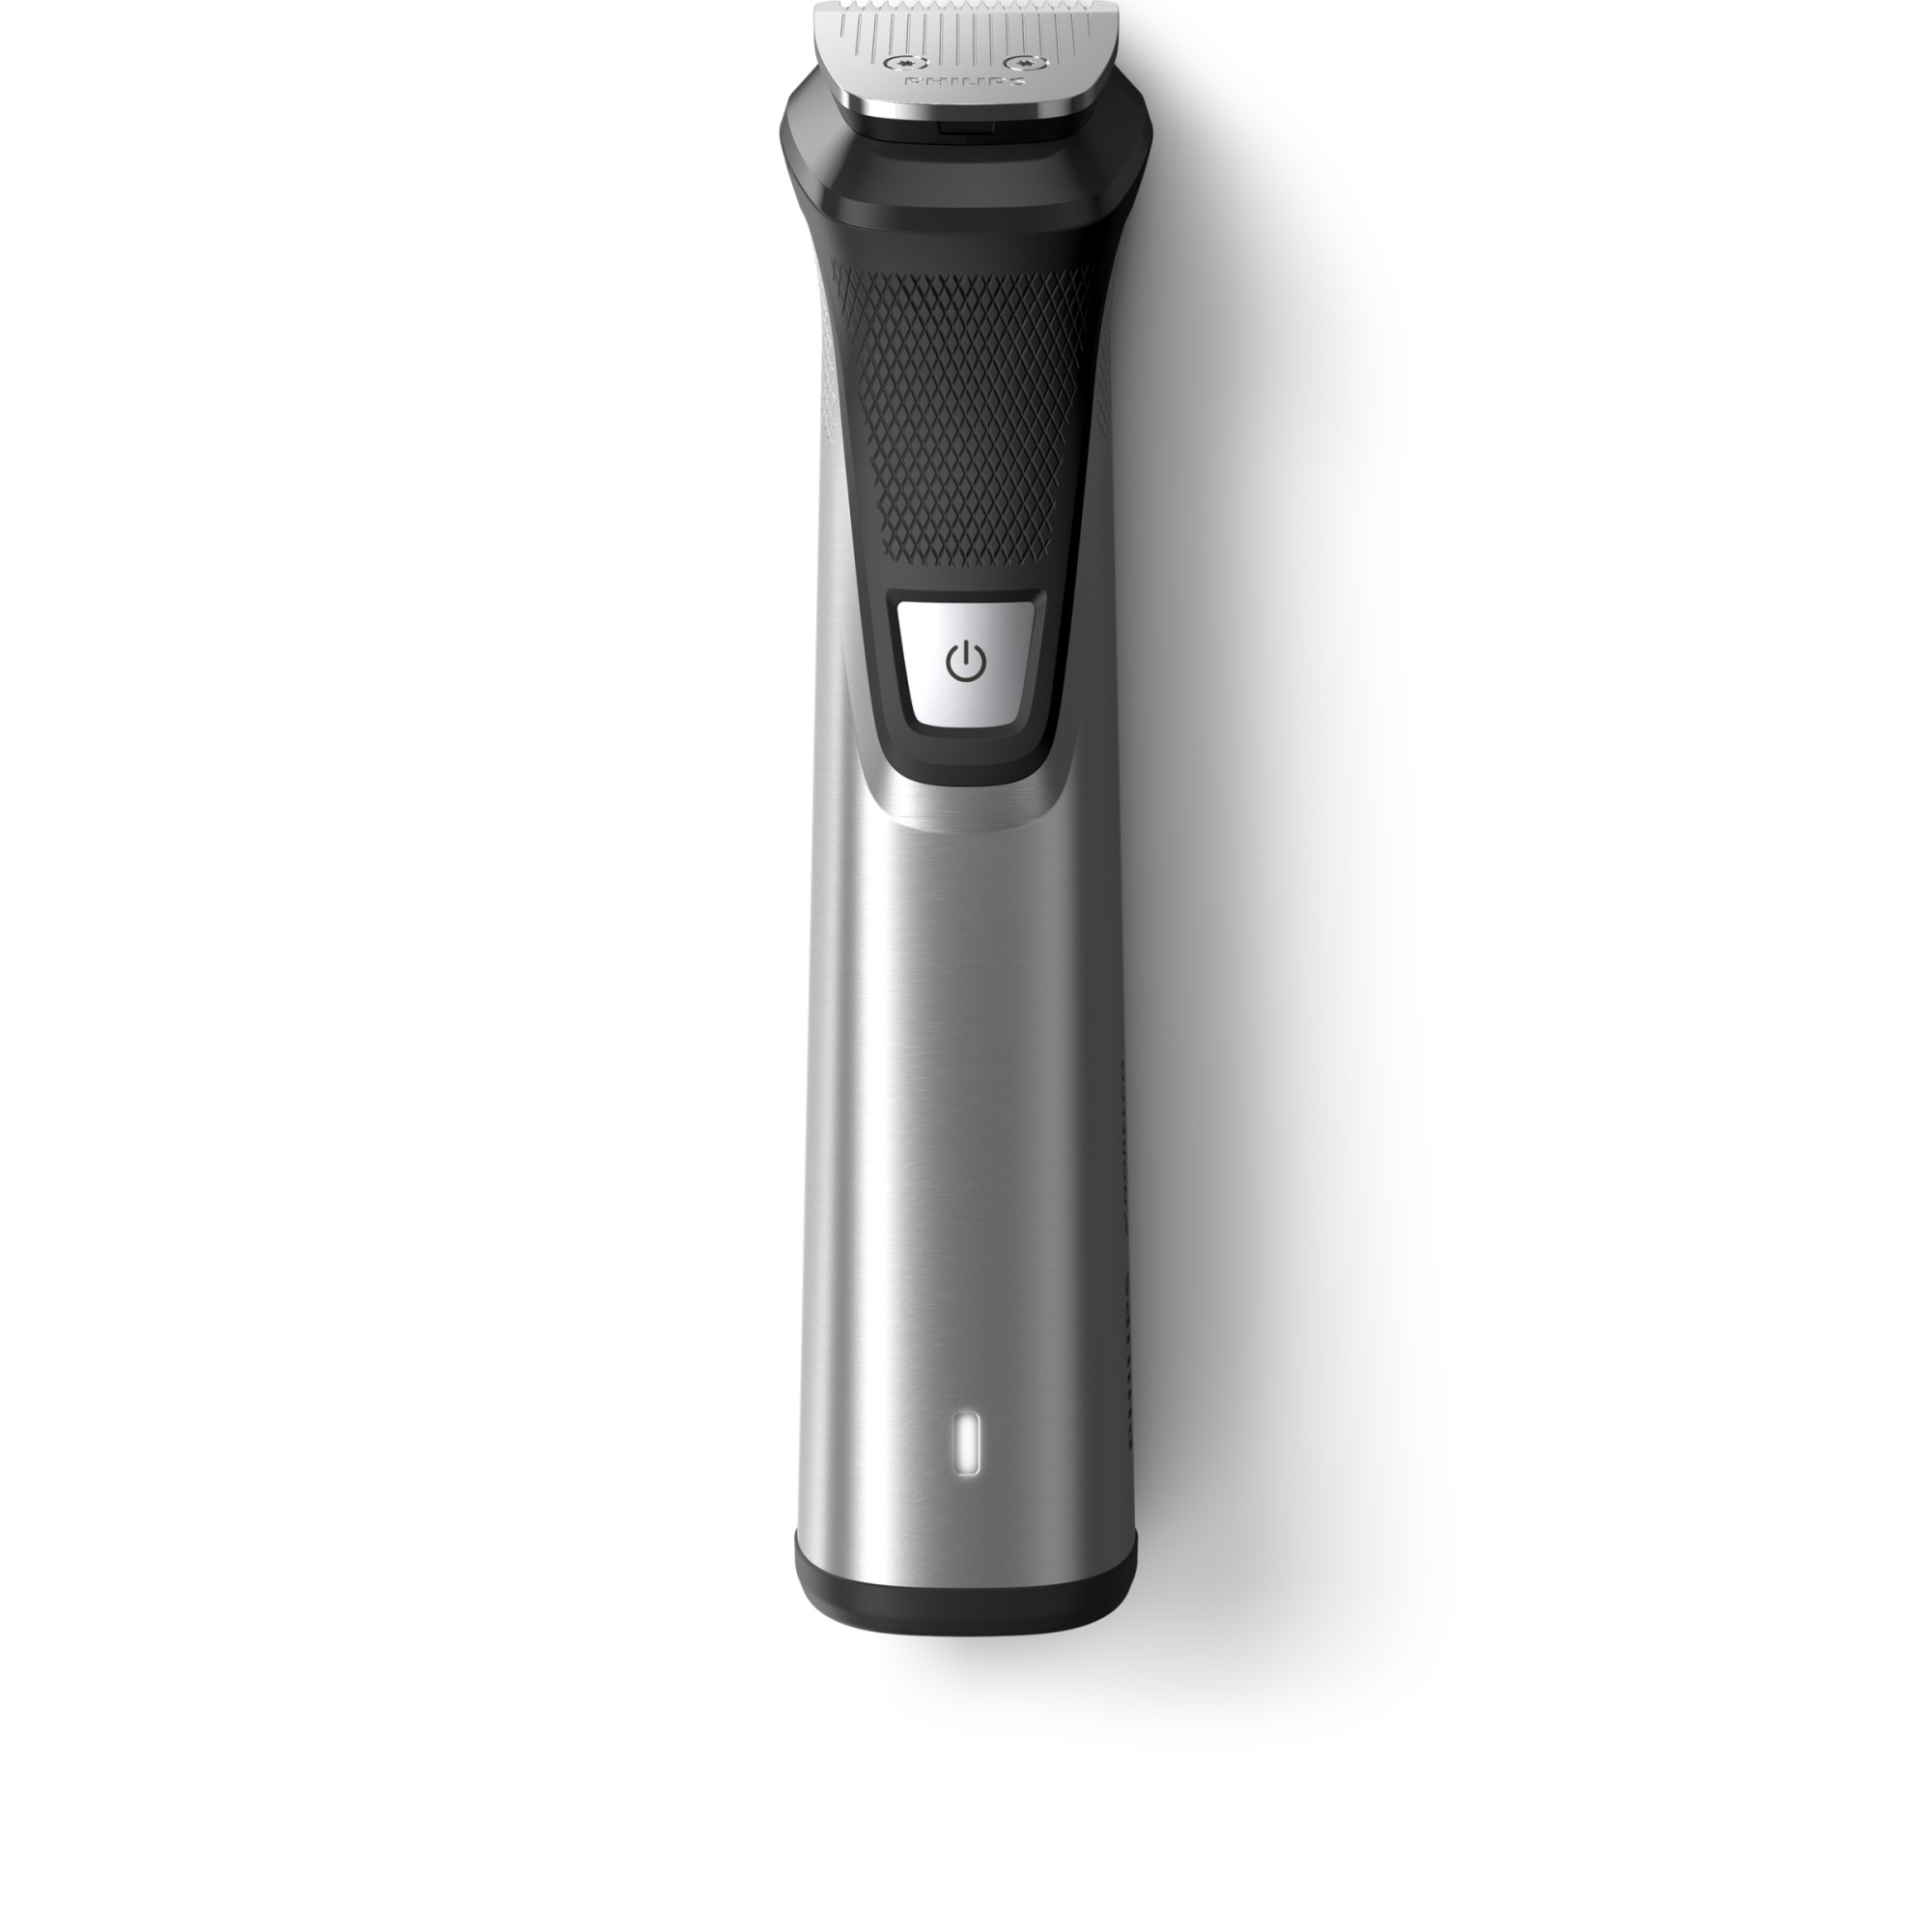 Philips Norelco Multigroom Series 7000 23 Piece Mens Grooming Kit, Trimmer For Beard, Head, Body, and Face - No Blade Oil Needed, MG7750/49 - image 18 of 21